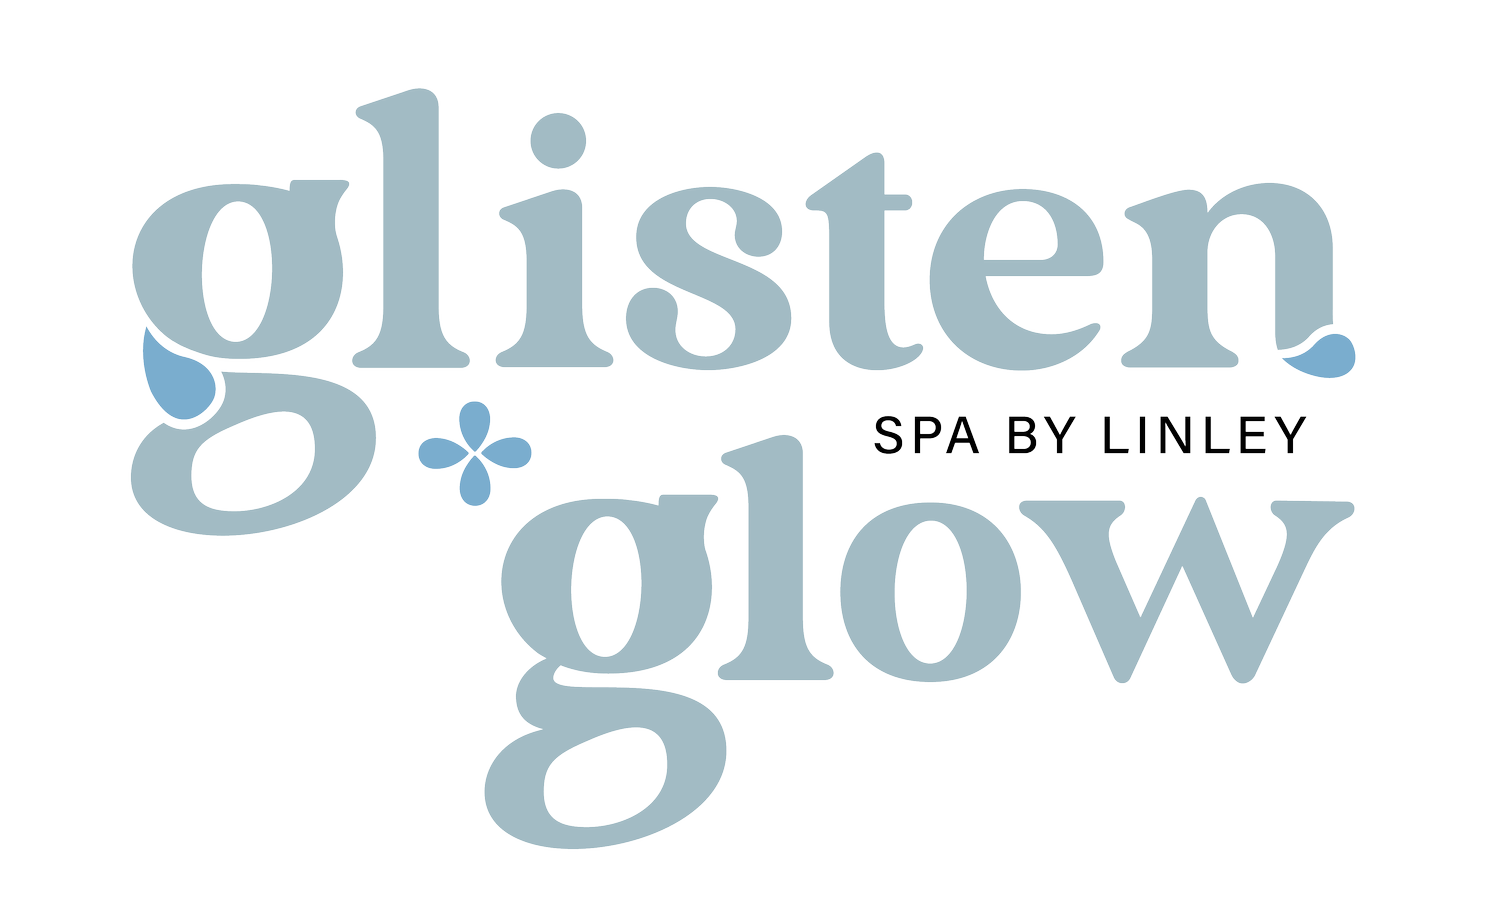 Glisten and Glow Spa by Linley